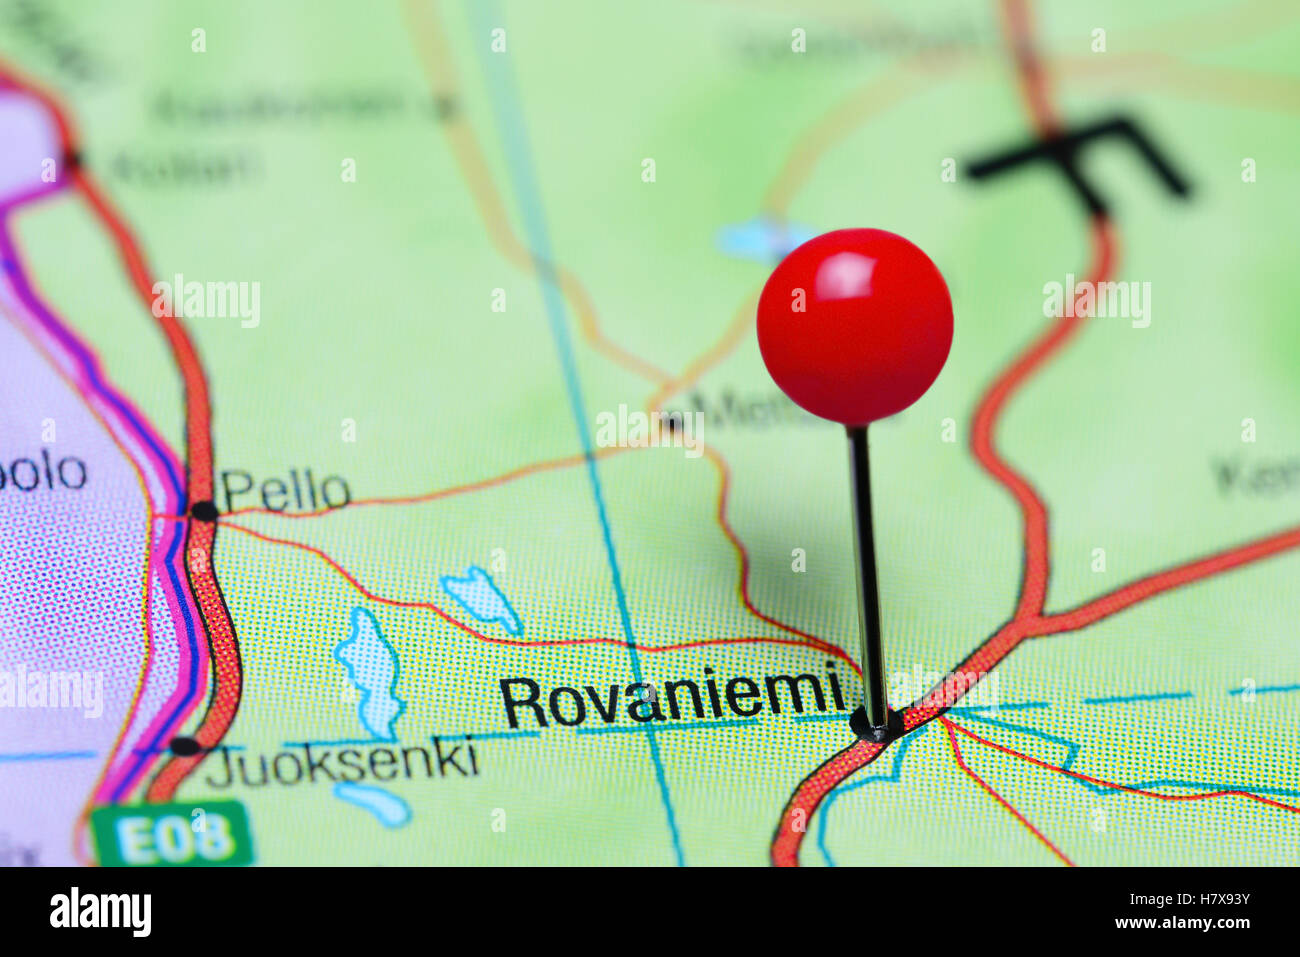 Rovaniemi pinned on a map of Finland Stock Photo